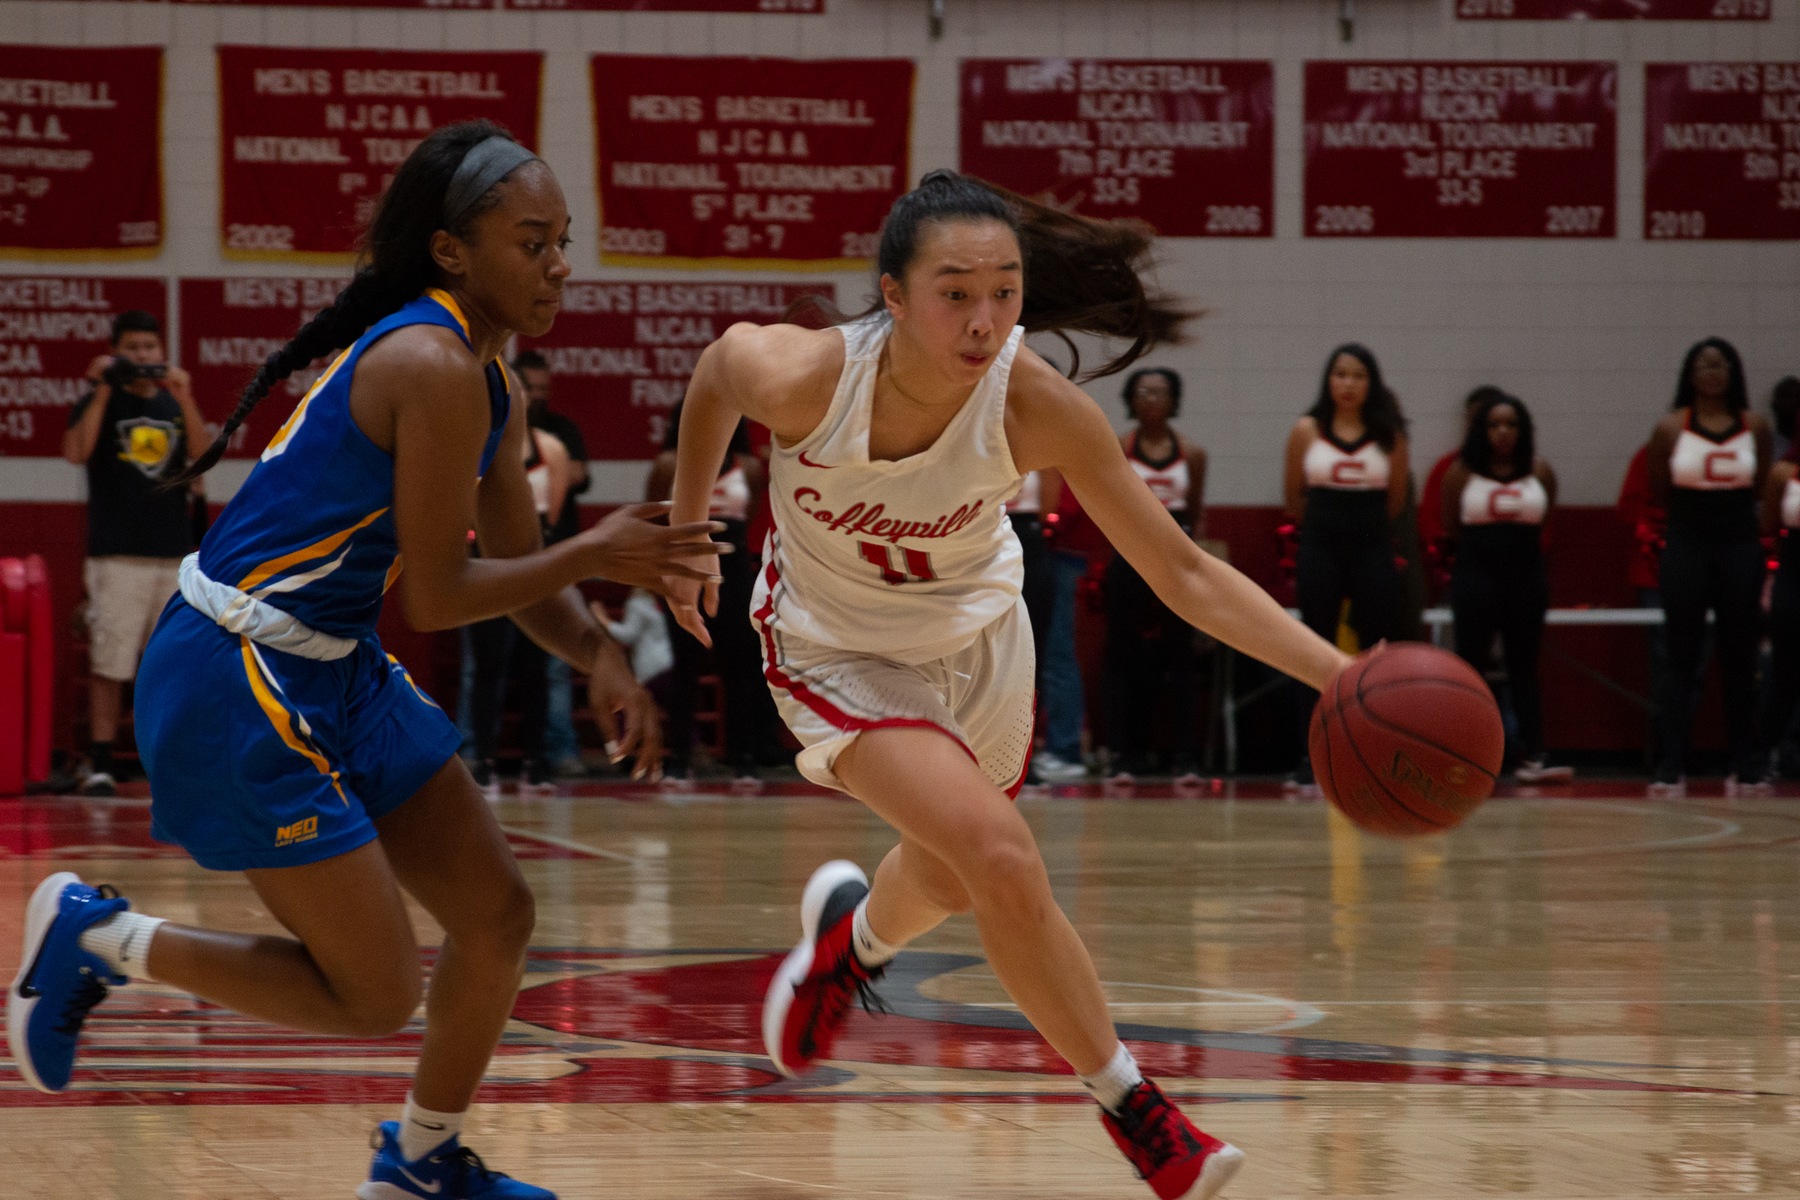 Red Raven Women's Basketball Continue Hot Early Season Start, Move to 6-0 on Season